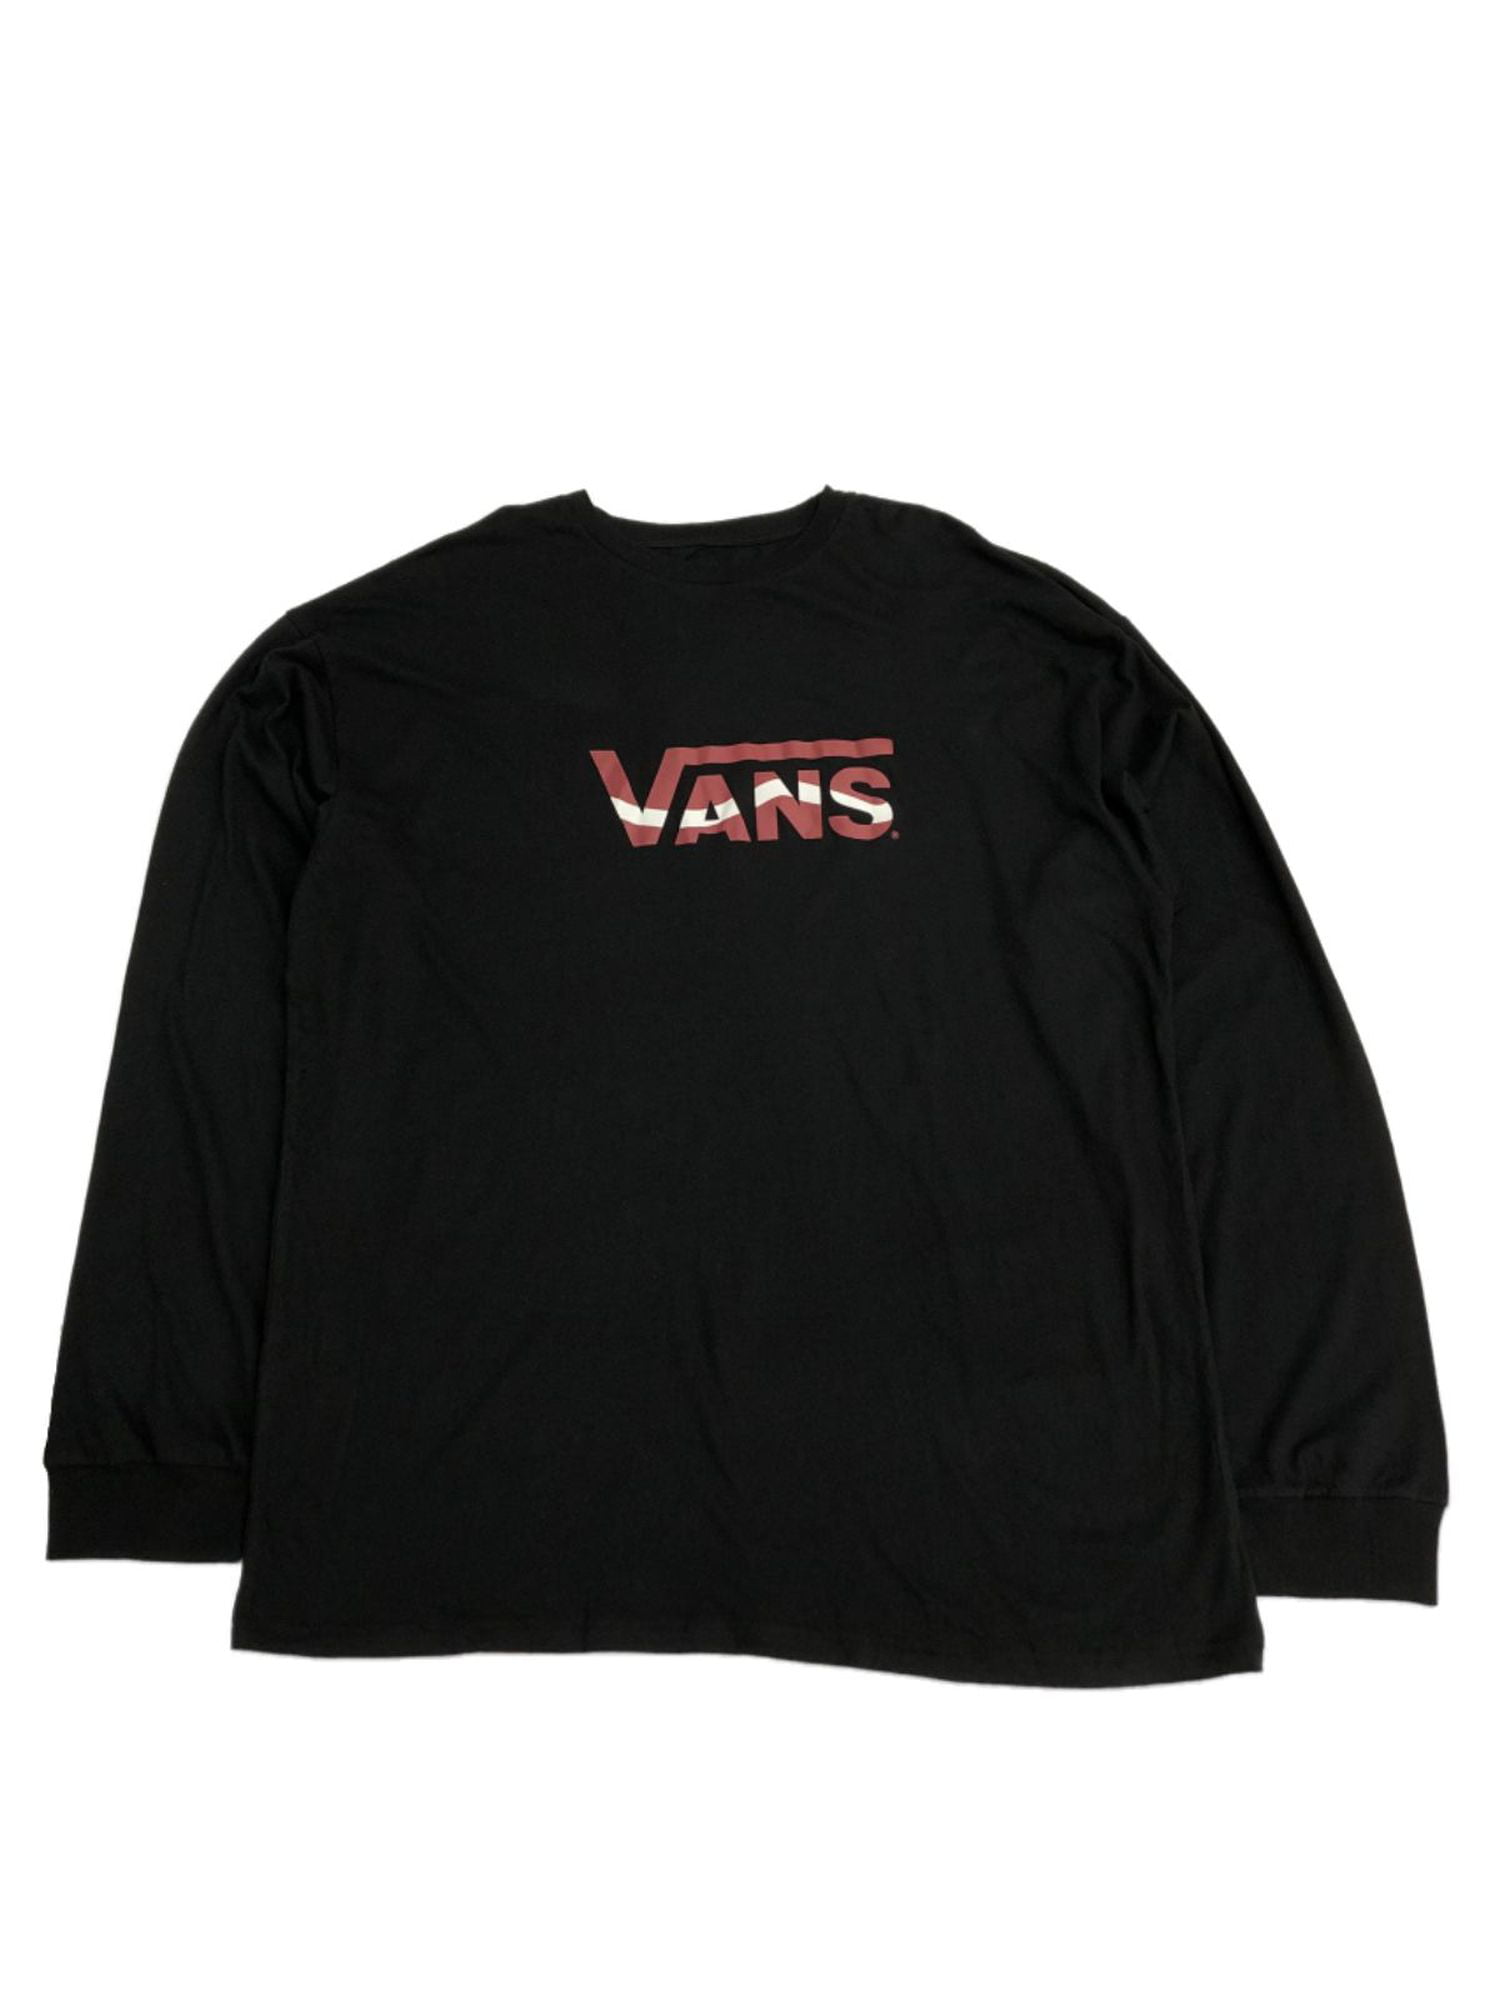 black and red vans shirt